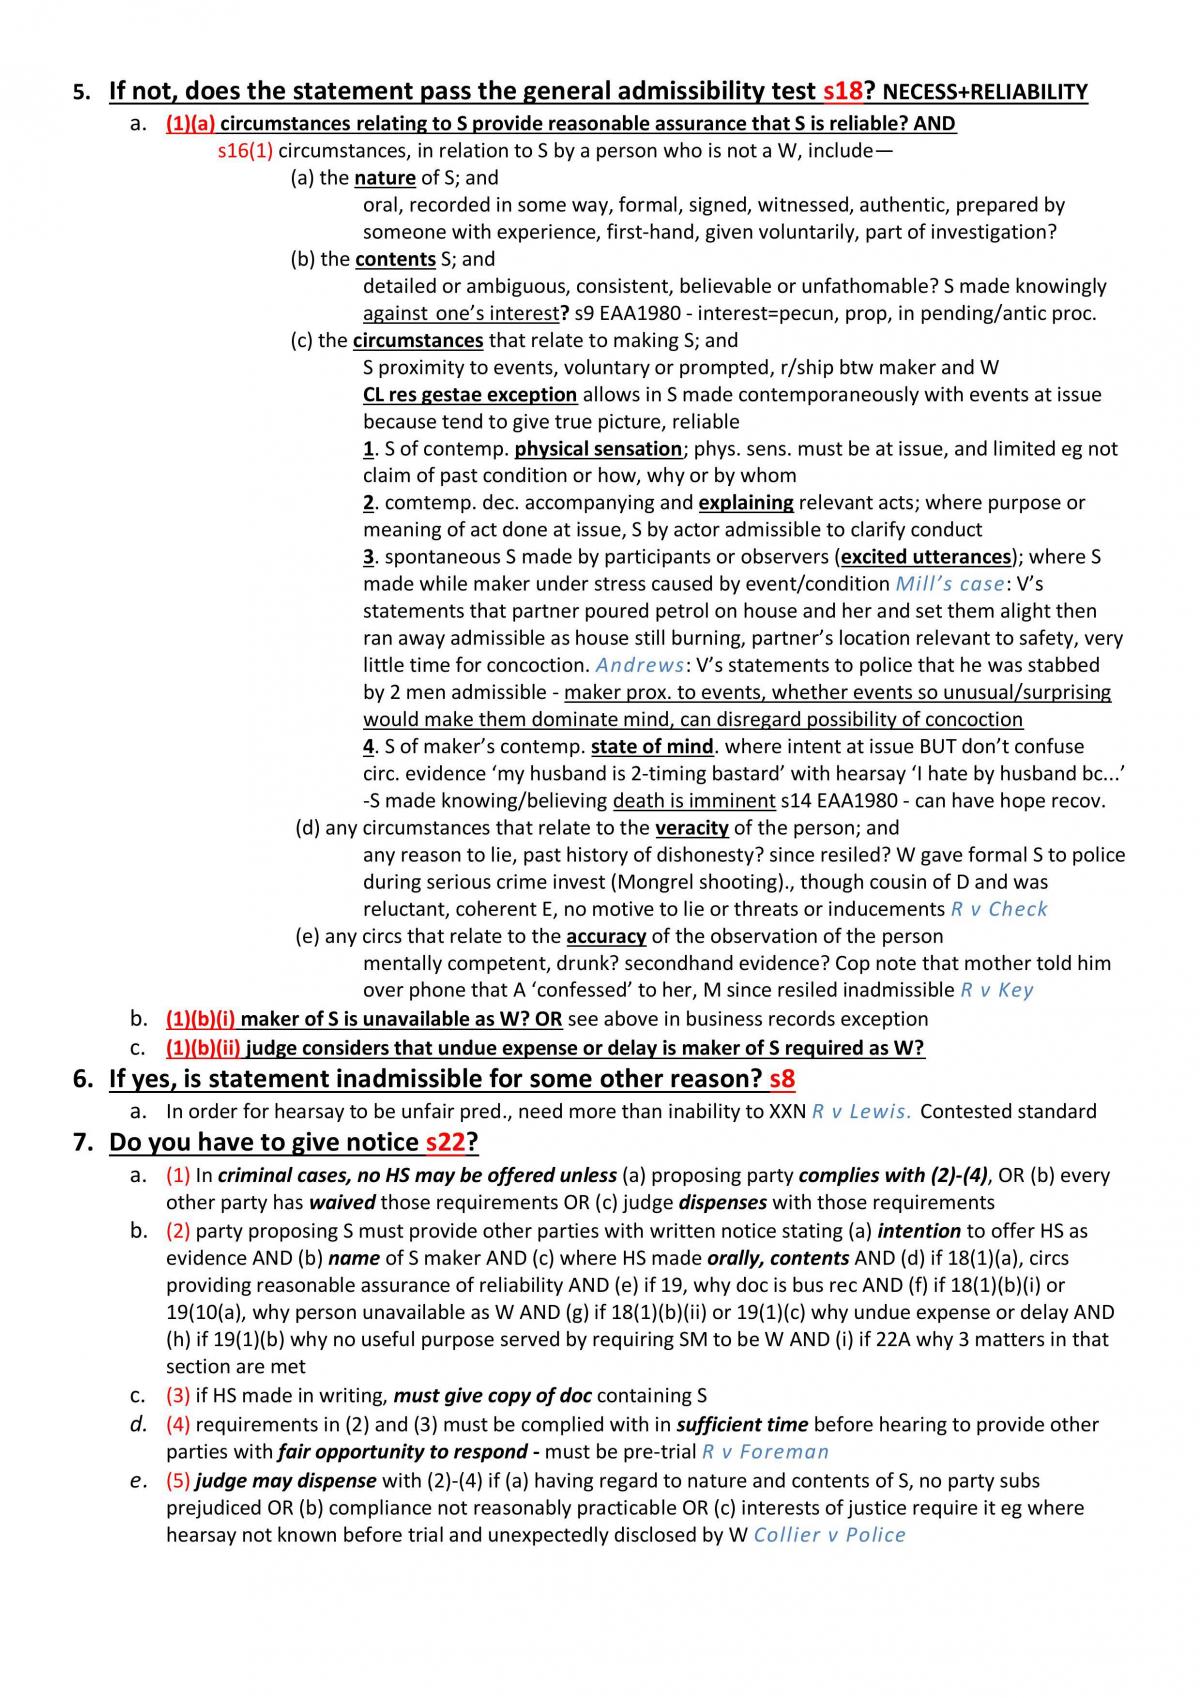 Evidence LAWGENRL 401 Notes - Page 25